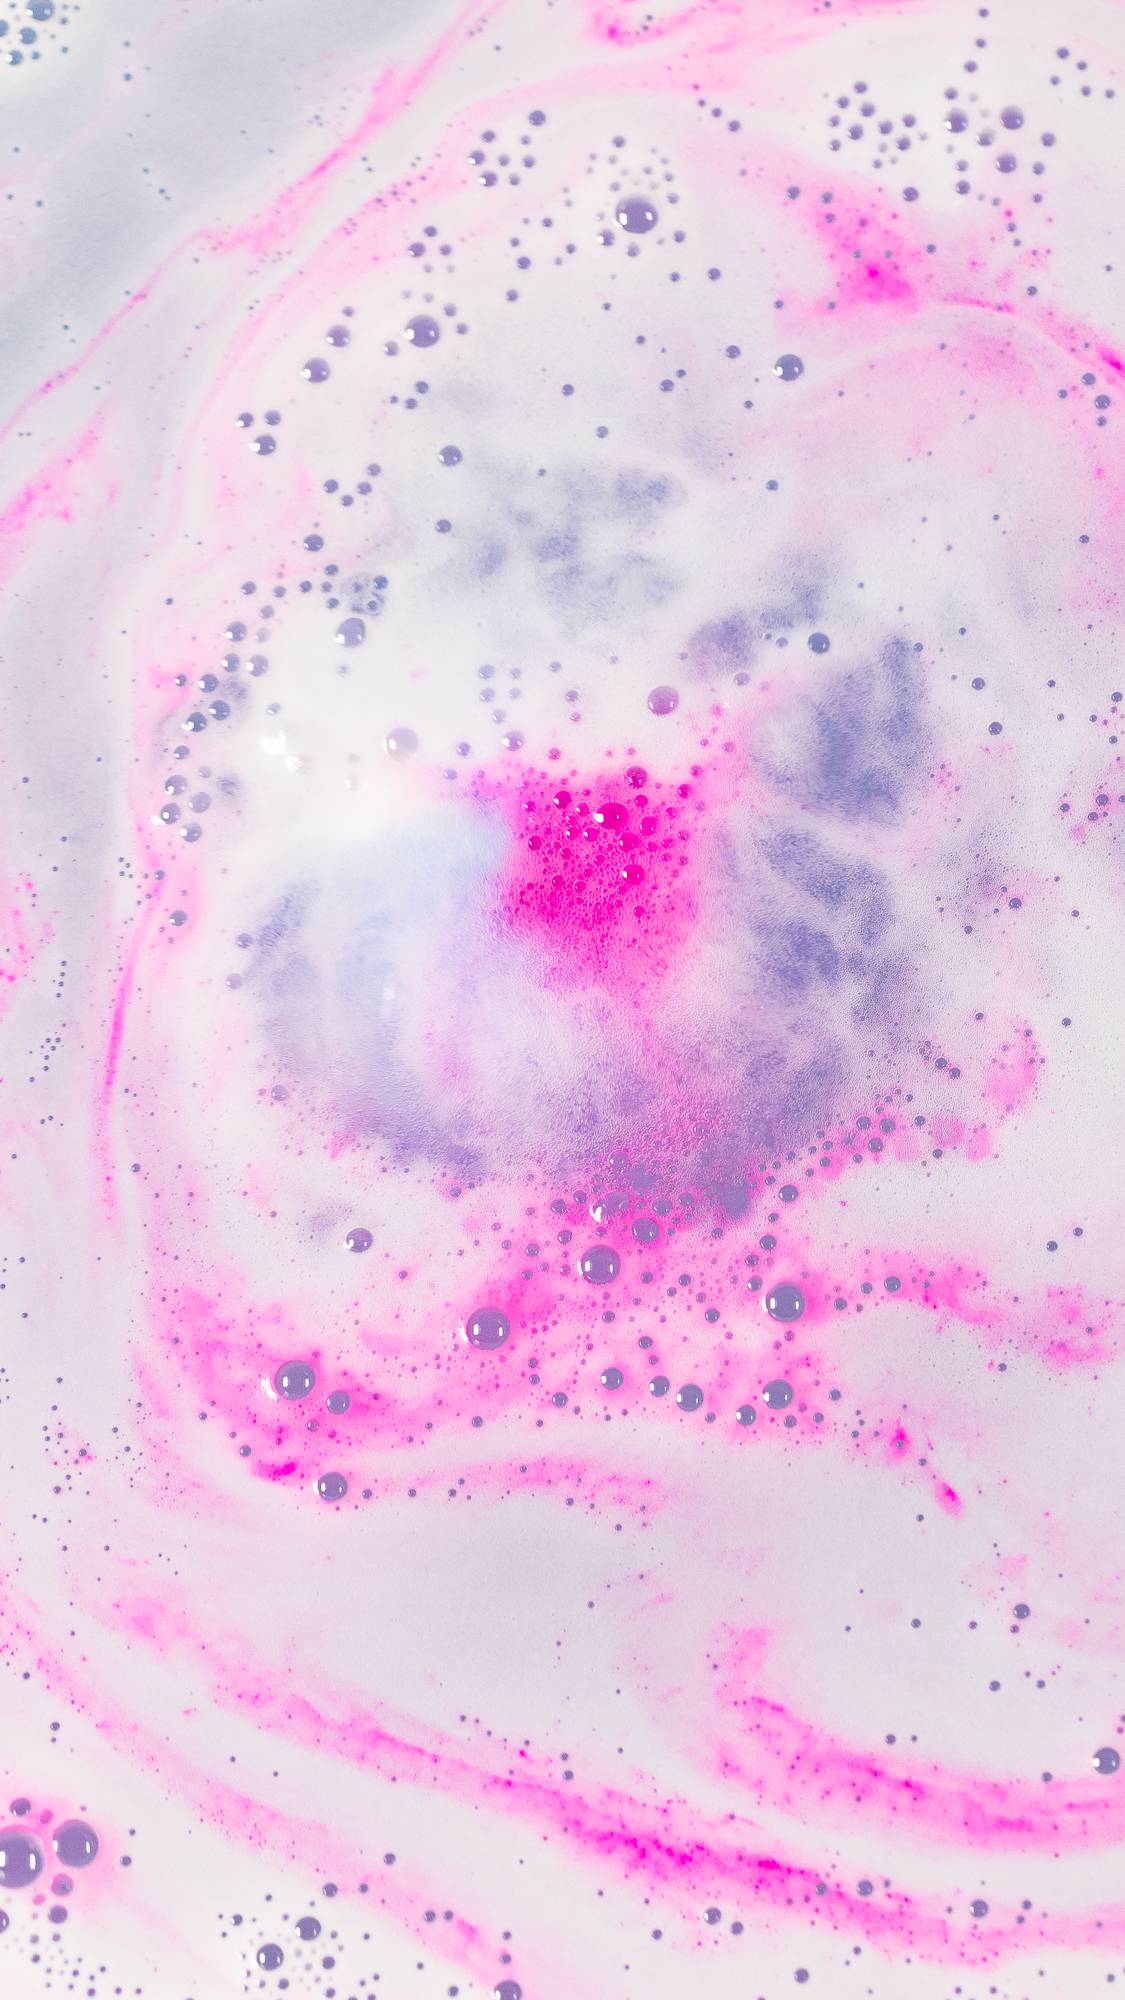 The Atom Heart Mother bath bomb has fully dissolved leaving foamy swirls of pink, blue and purple. 